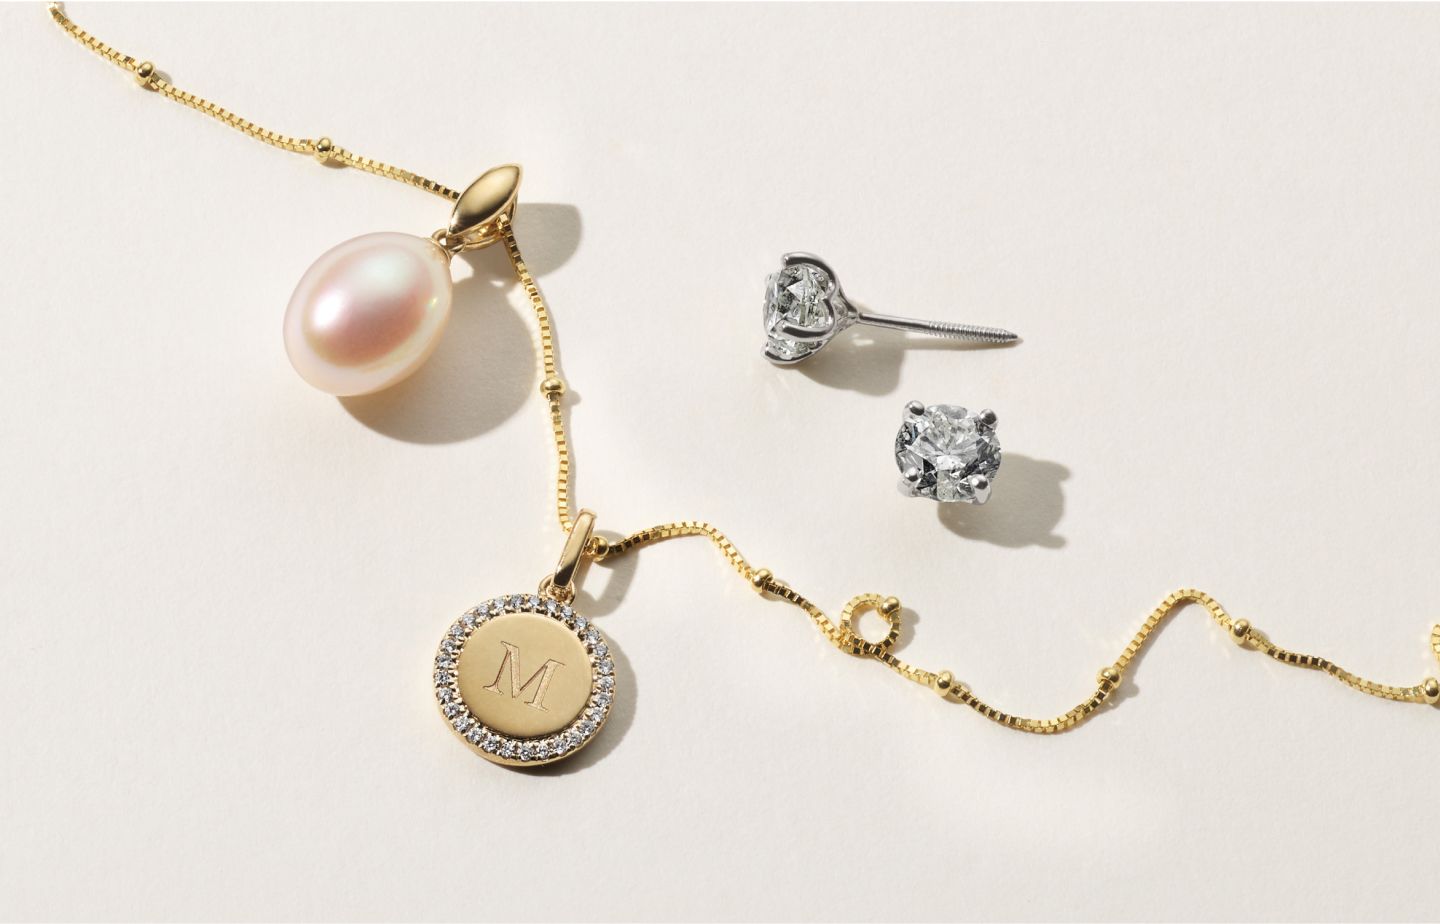 A fashion neclace with a pearl pendant and a monogrammed diamond disk charm and a pair of diamond stud earrings